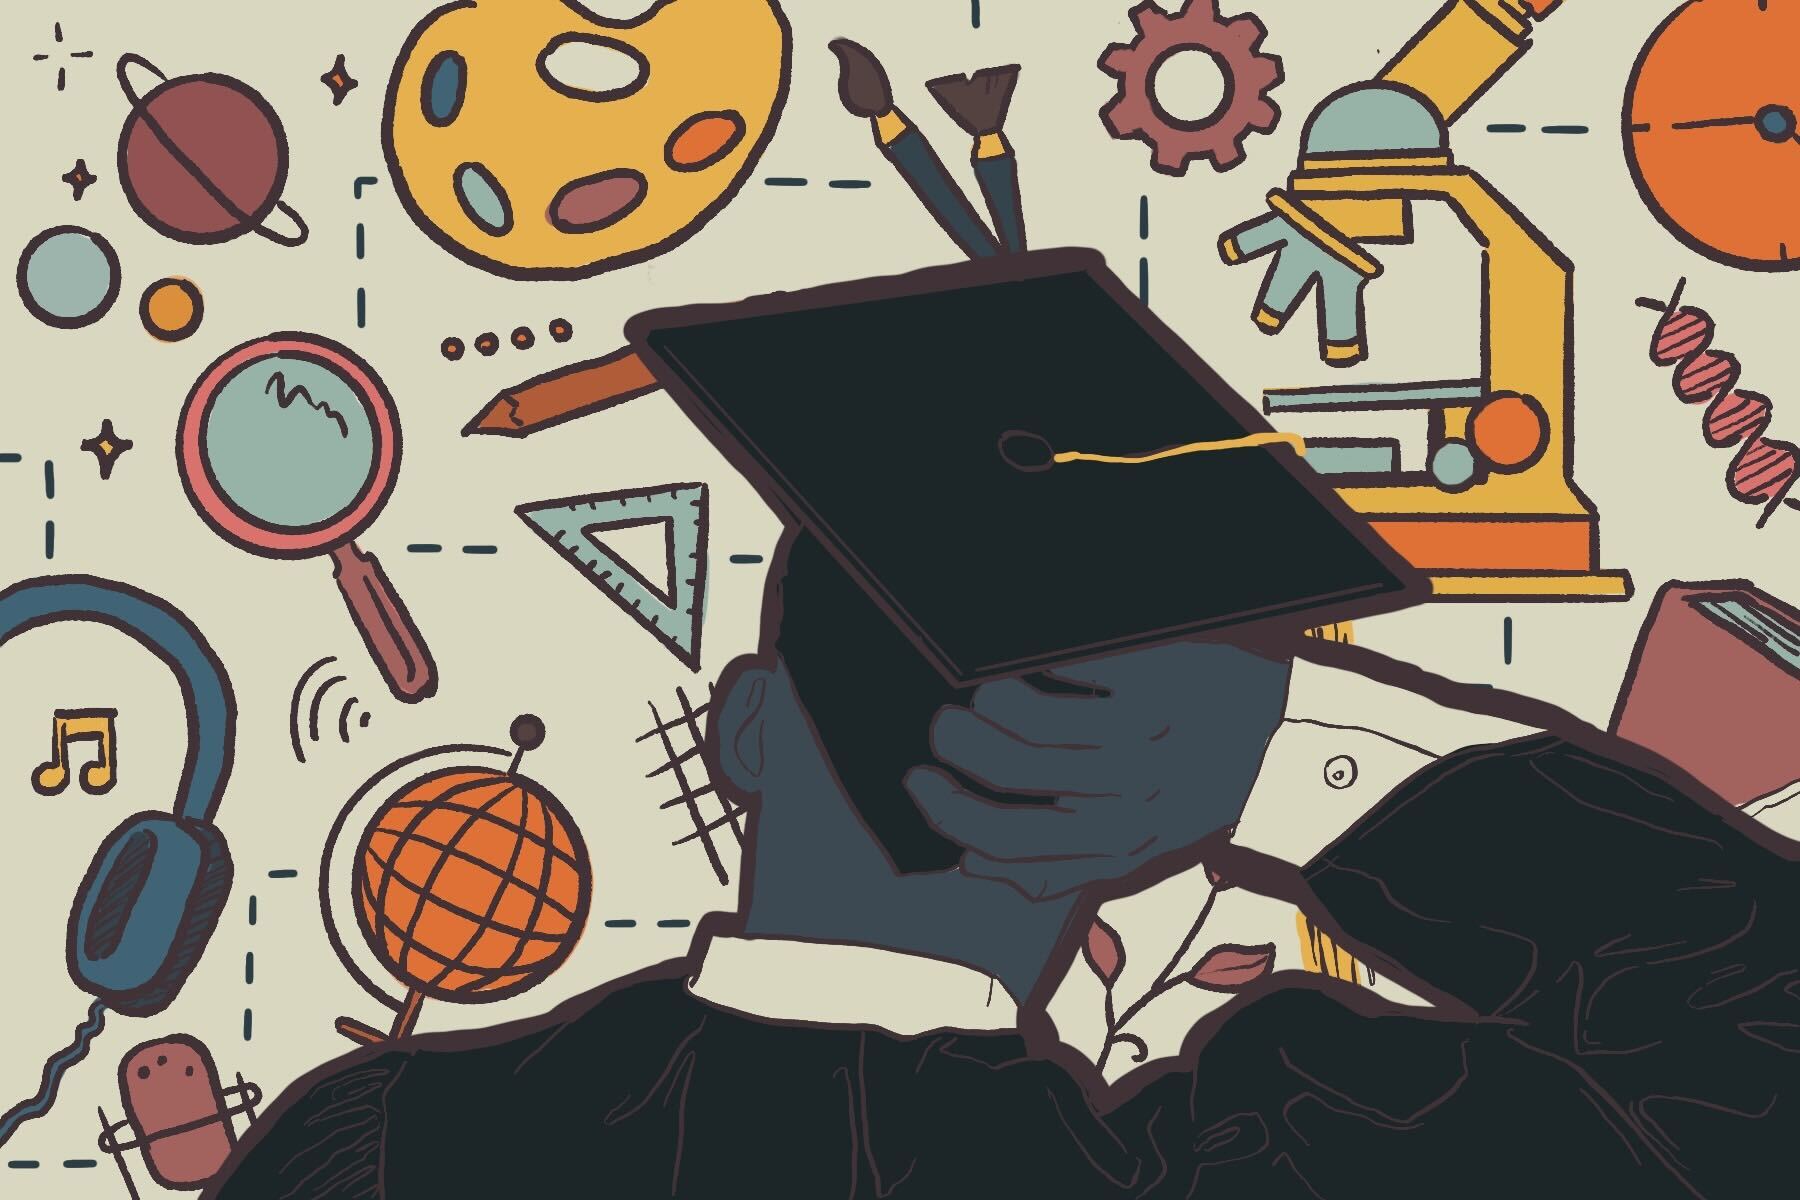 In an article about college degrees, an illustration of a college graduate in cap and gown